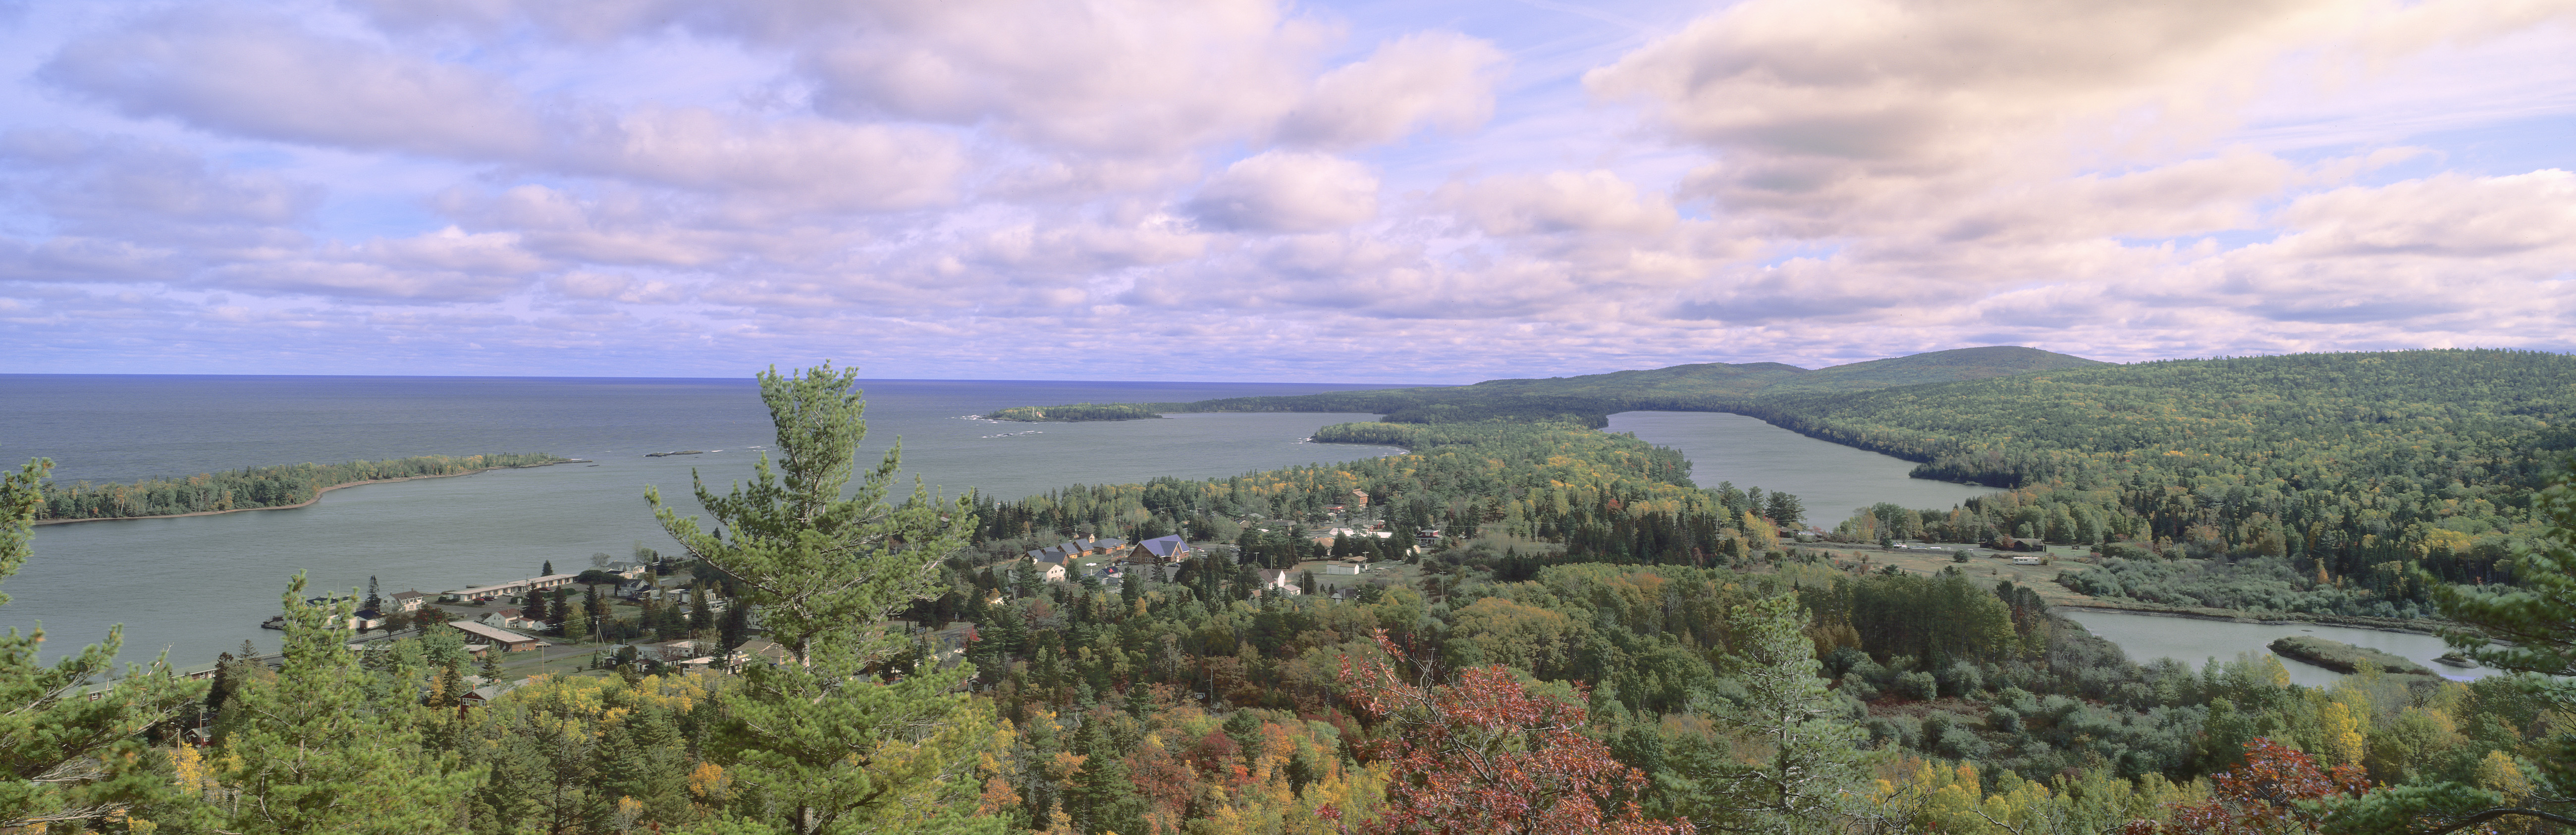 Keweenaw Peninsula and Copper Harbor, Michigan’s Upper Peninsula, Michigan Keweenaw Peninsula and Copper Harbor, Michigan’s Upper Peninsula, Michigan (Photo by: Joe Sohm/Visions of America/Universal Images Group via Getty Images).